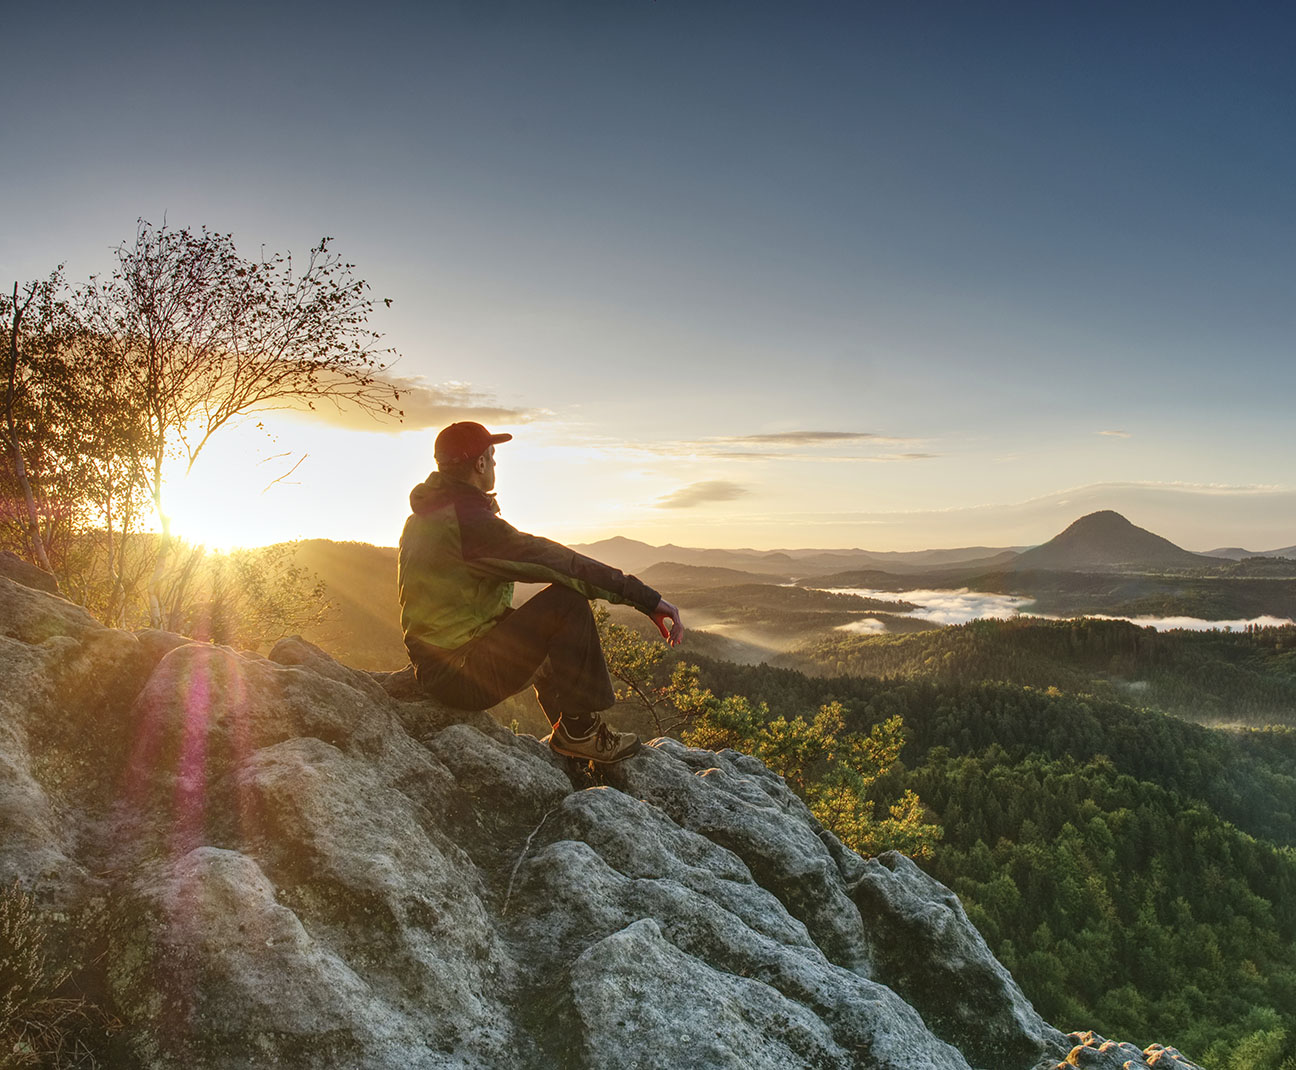 man sitting on a cliff looking out at mountain scenery